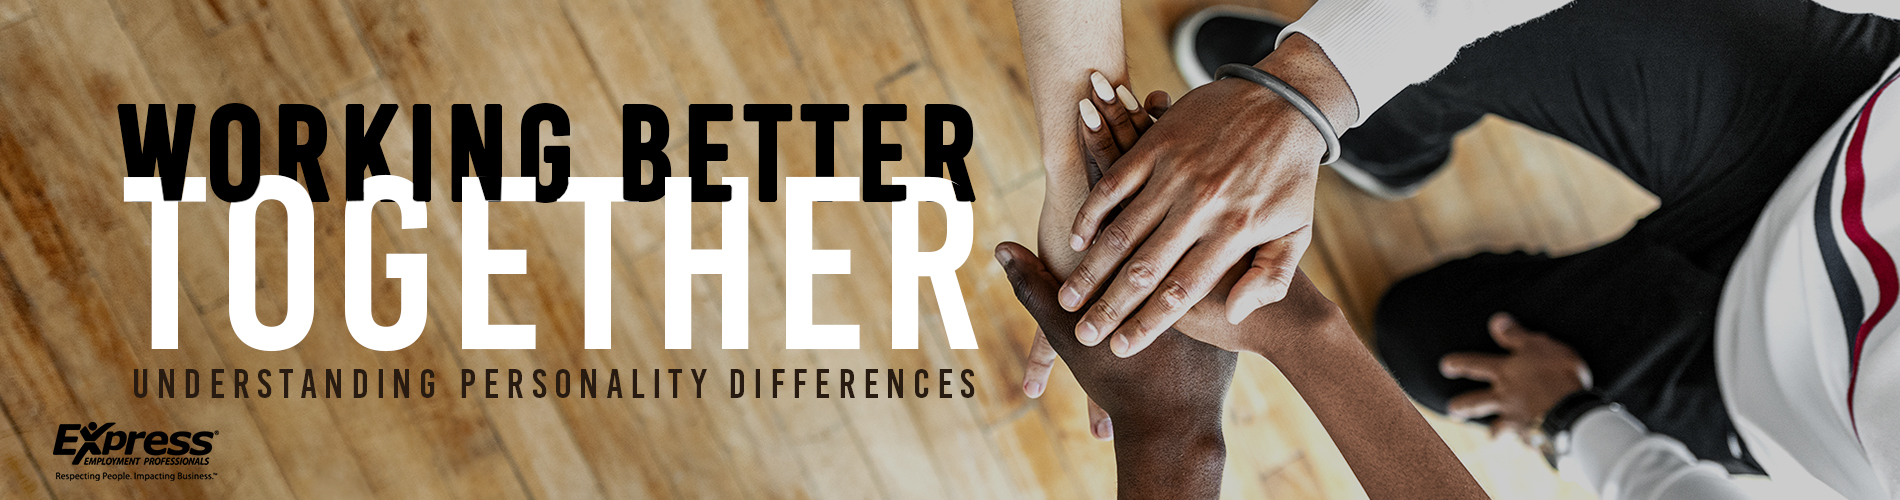 Working Better Together Banner